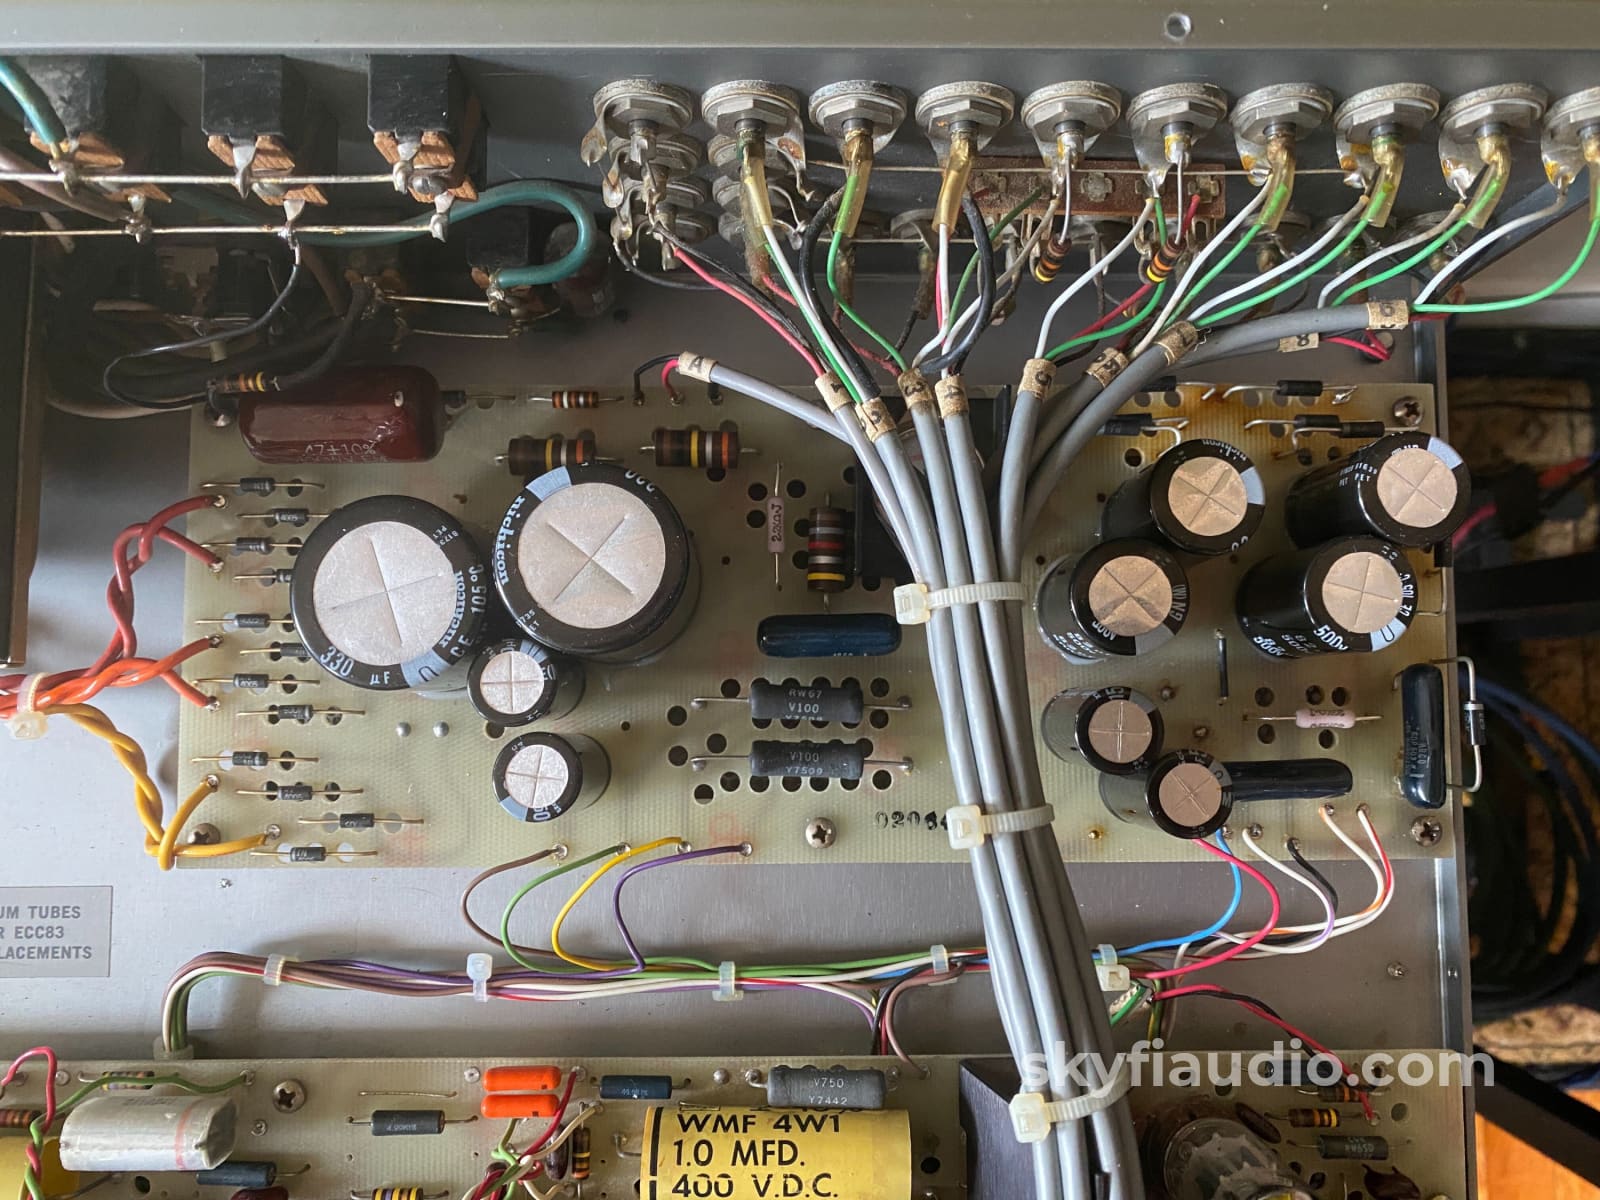 Audio Research Sp-3A-1 Vintage Tube Preamplifier - Collector Grade Restoration Reviewed By The